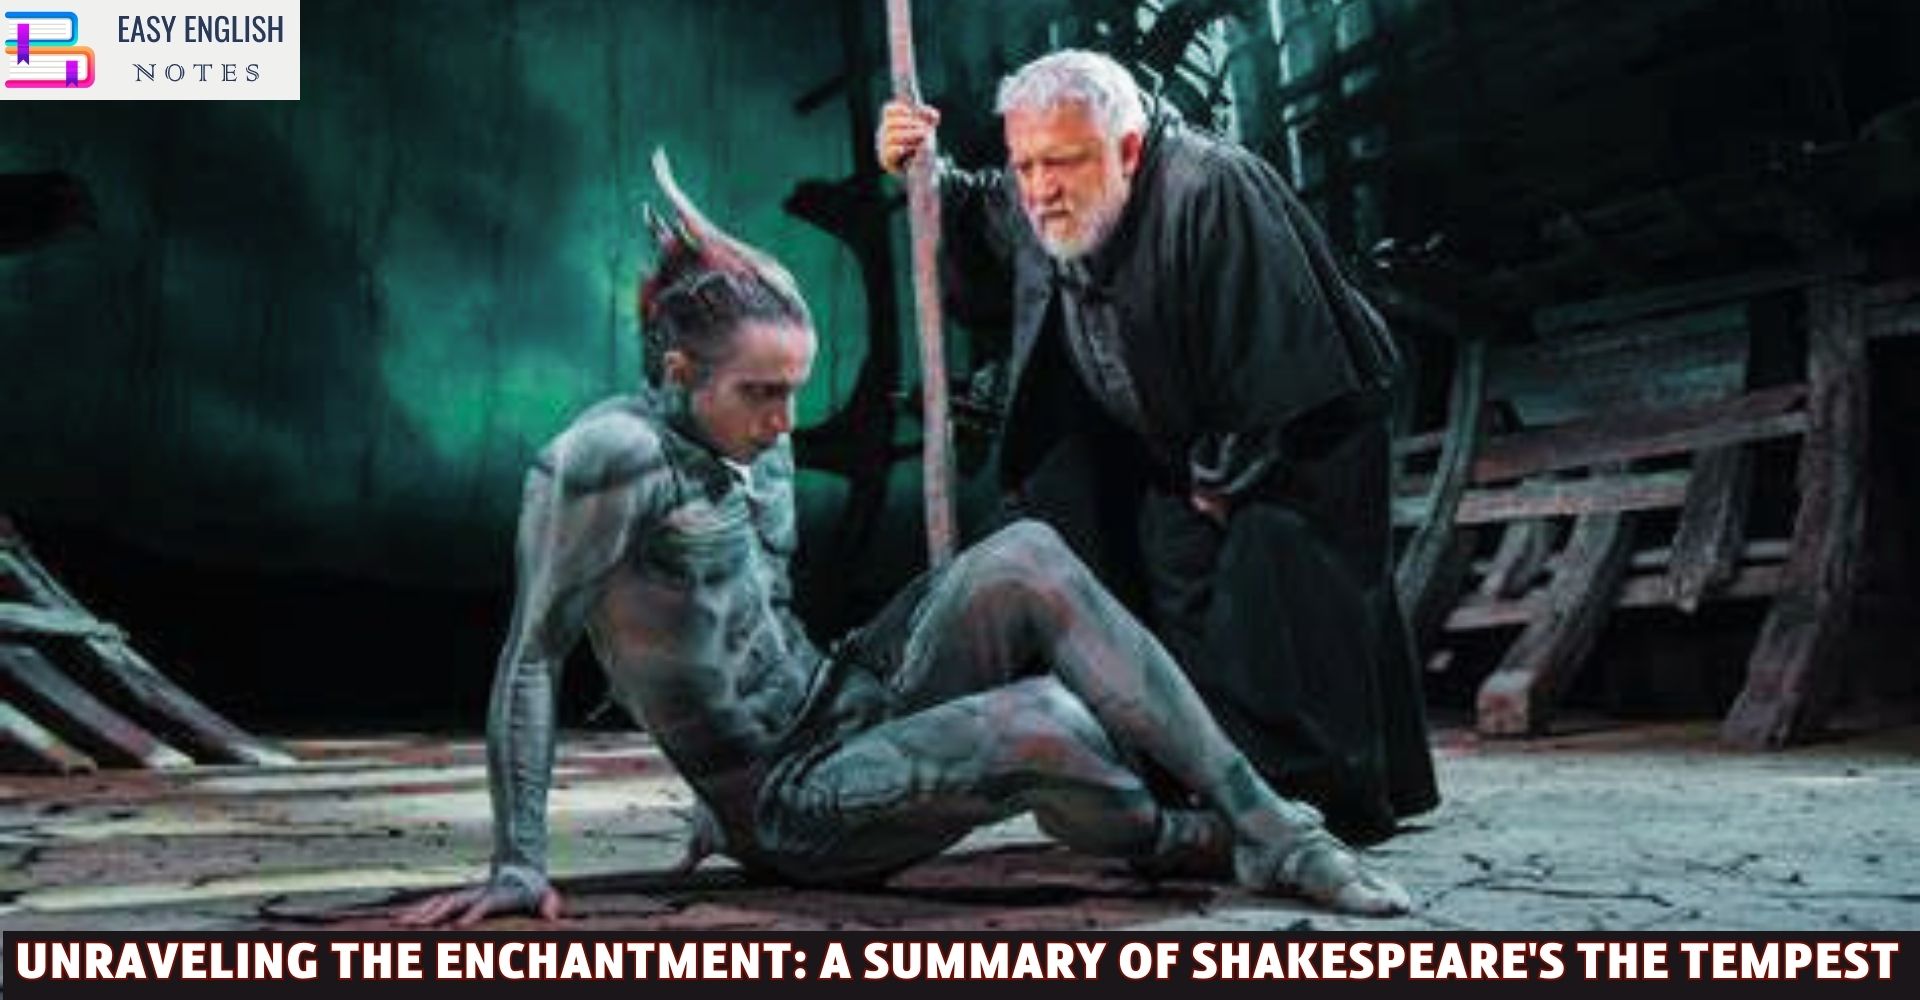 Unraveling the Enchantment: A Summary of Shakespeare's The Tempest